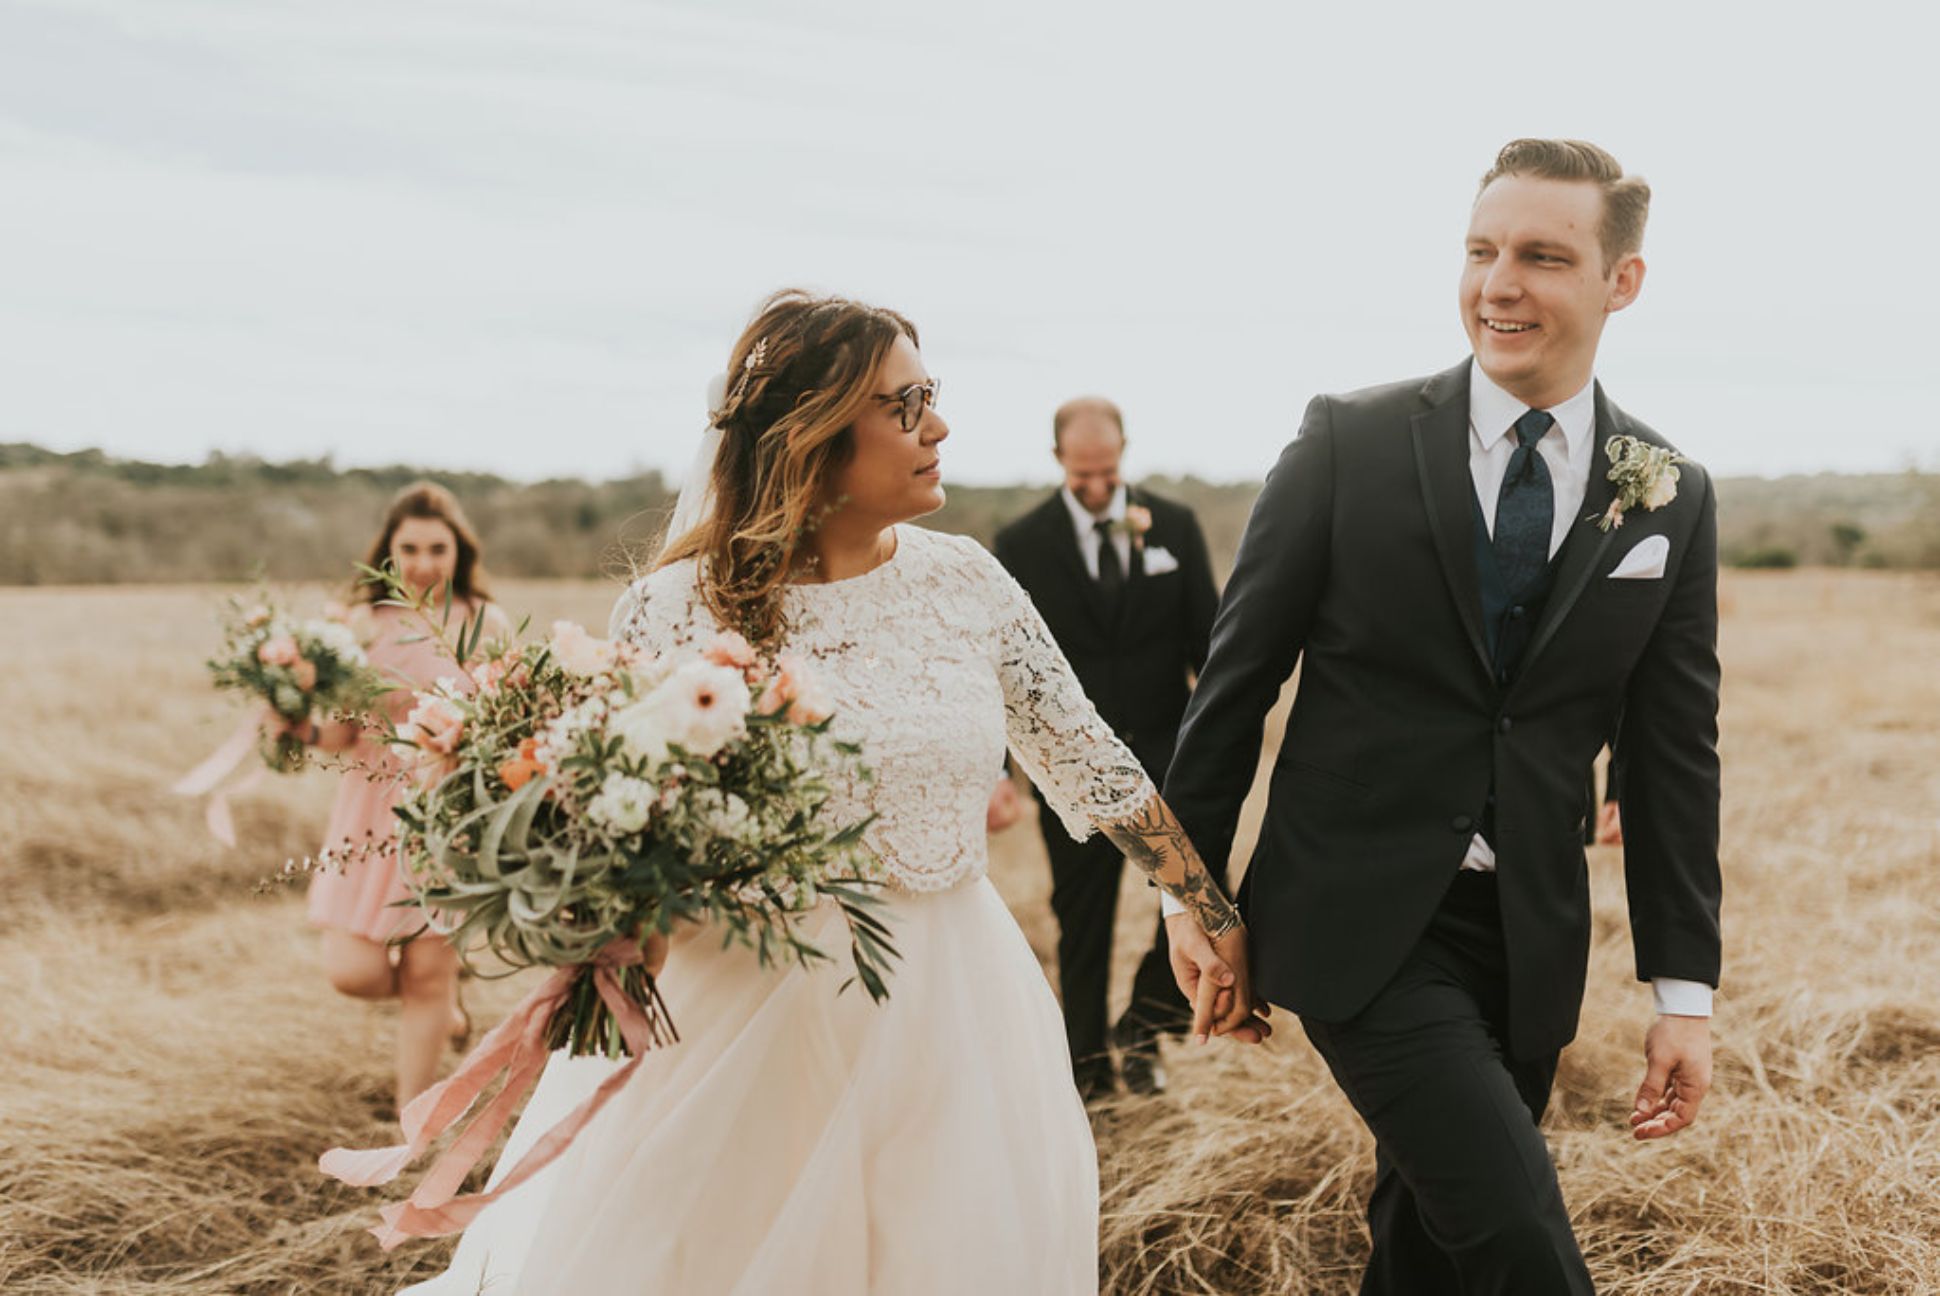 Newlyweds walking hand in hand follow by a bridesmaid and groomsman